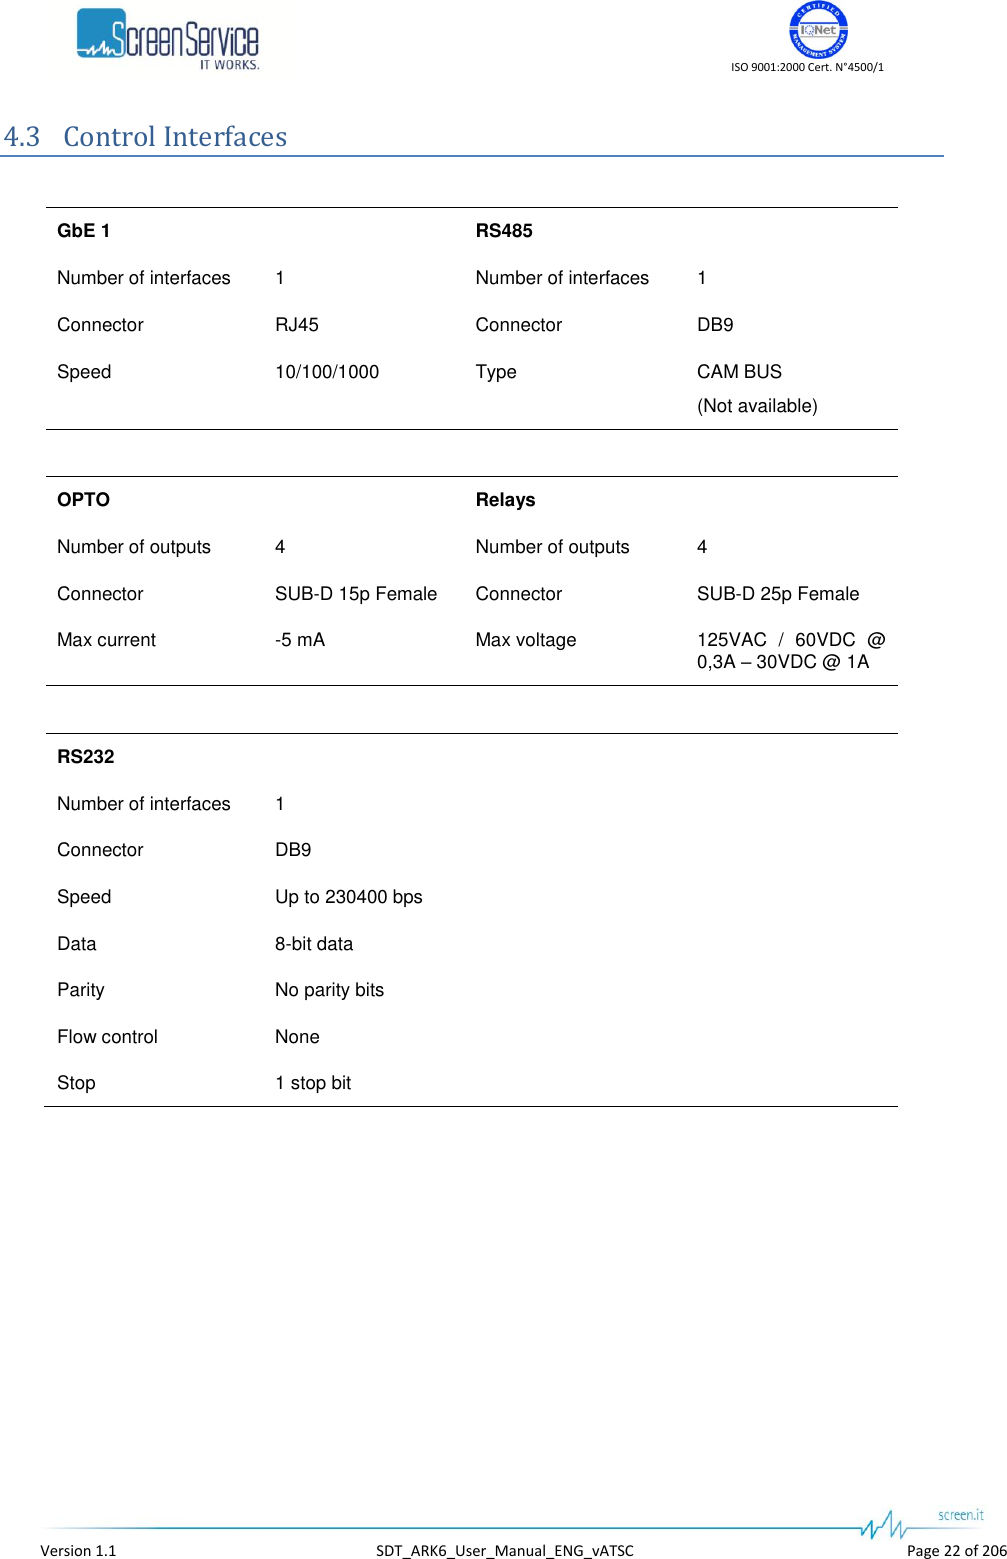    ISO 9001:2000 Cert. N°4500/1   Version 1.1  SDT_ARK6_User_Manual_ENG_vATSC  Page 22 of 206 4.3 Control Interfaces  GbE 1  RS485  Number of interfaces 1 Number of interfaces 1 Connector RJ45 Connector DB9 Speed 10/100/1000 Type CAM BUS  (Not available)     OPTO  Relays  Number of outputs 4 Number of outputs 4 Connector SUB-D 15p Female Connector SUB-D 25p Female Max current -5 mA Max voltage 125VAC  /  60VDC  @ 0,3A – 30VDC @ 1A     RS232    Number of interfaces 1   Connector DB9   Speed Up to 230400 bps   Data 8-bit data   Parity No parity bits   Flow control None   Stop 1 stop bit    